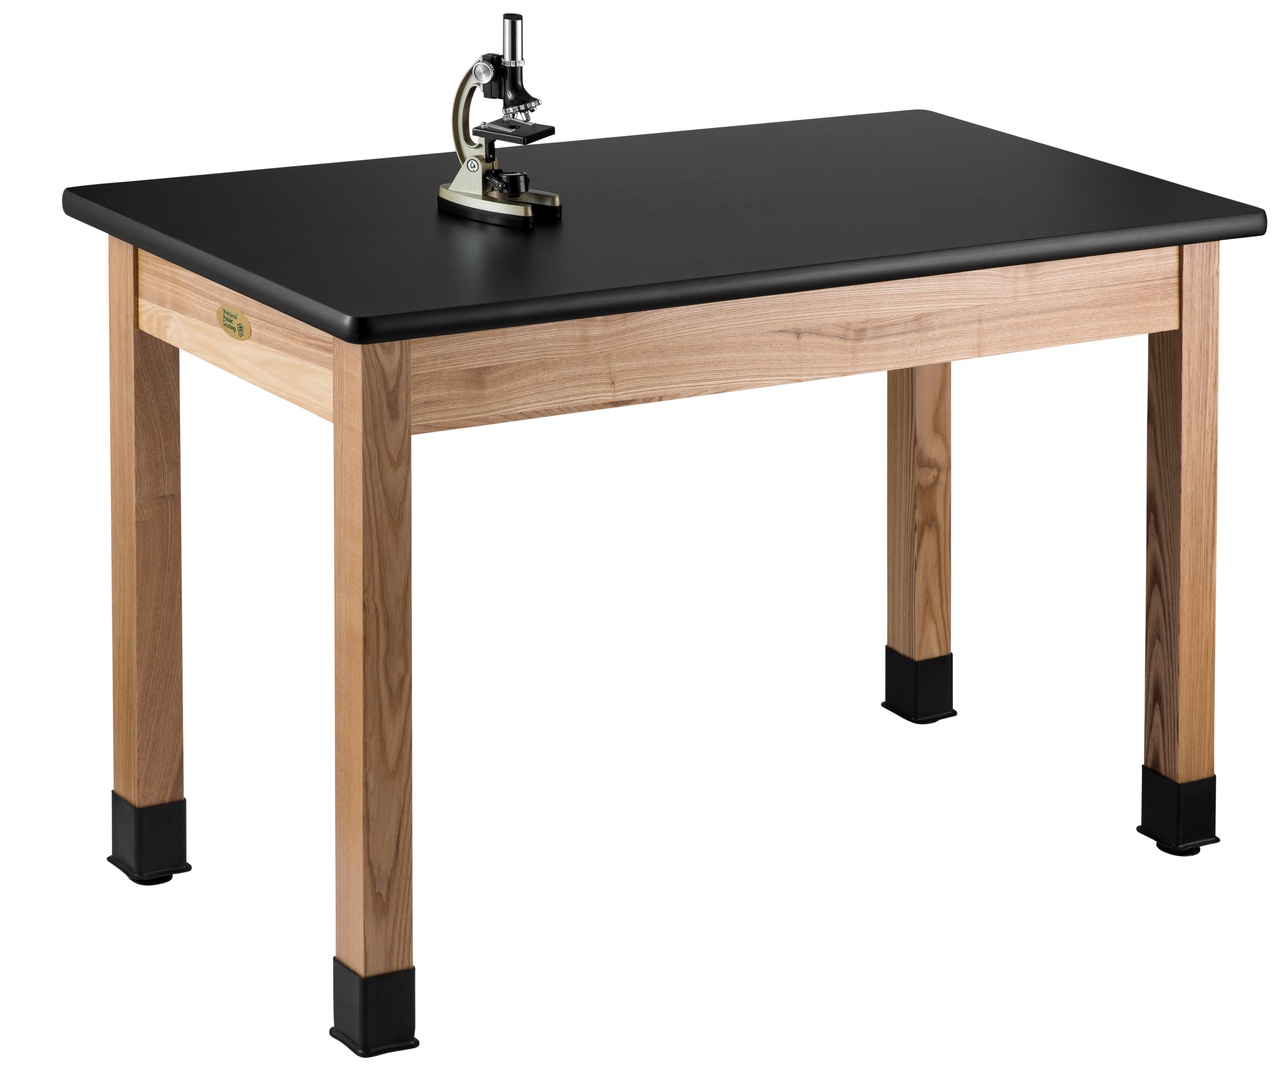 NPS Wood Science Lab Table -  30"x60"x36" -  HPL Top - Black Top and Ash Leg